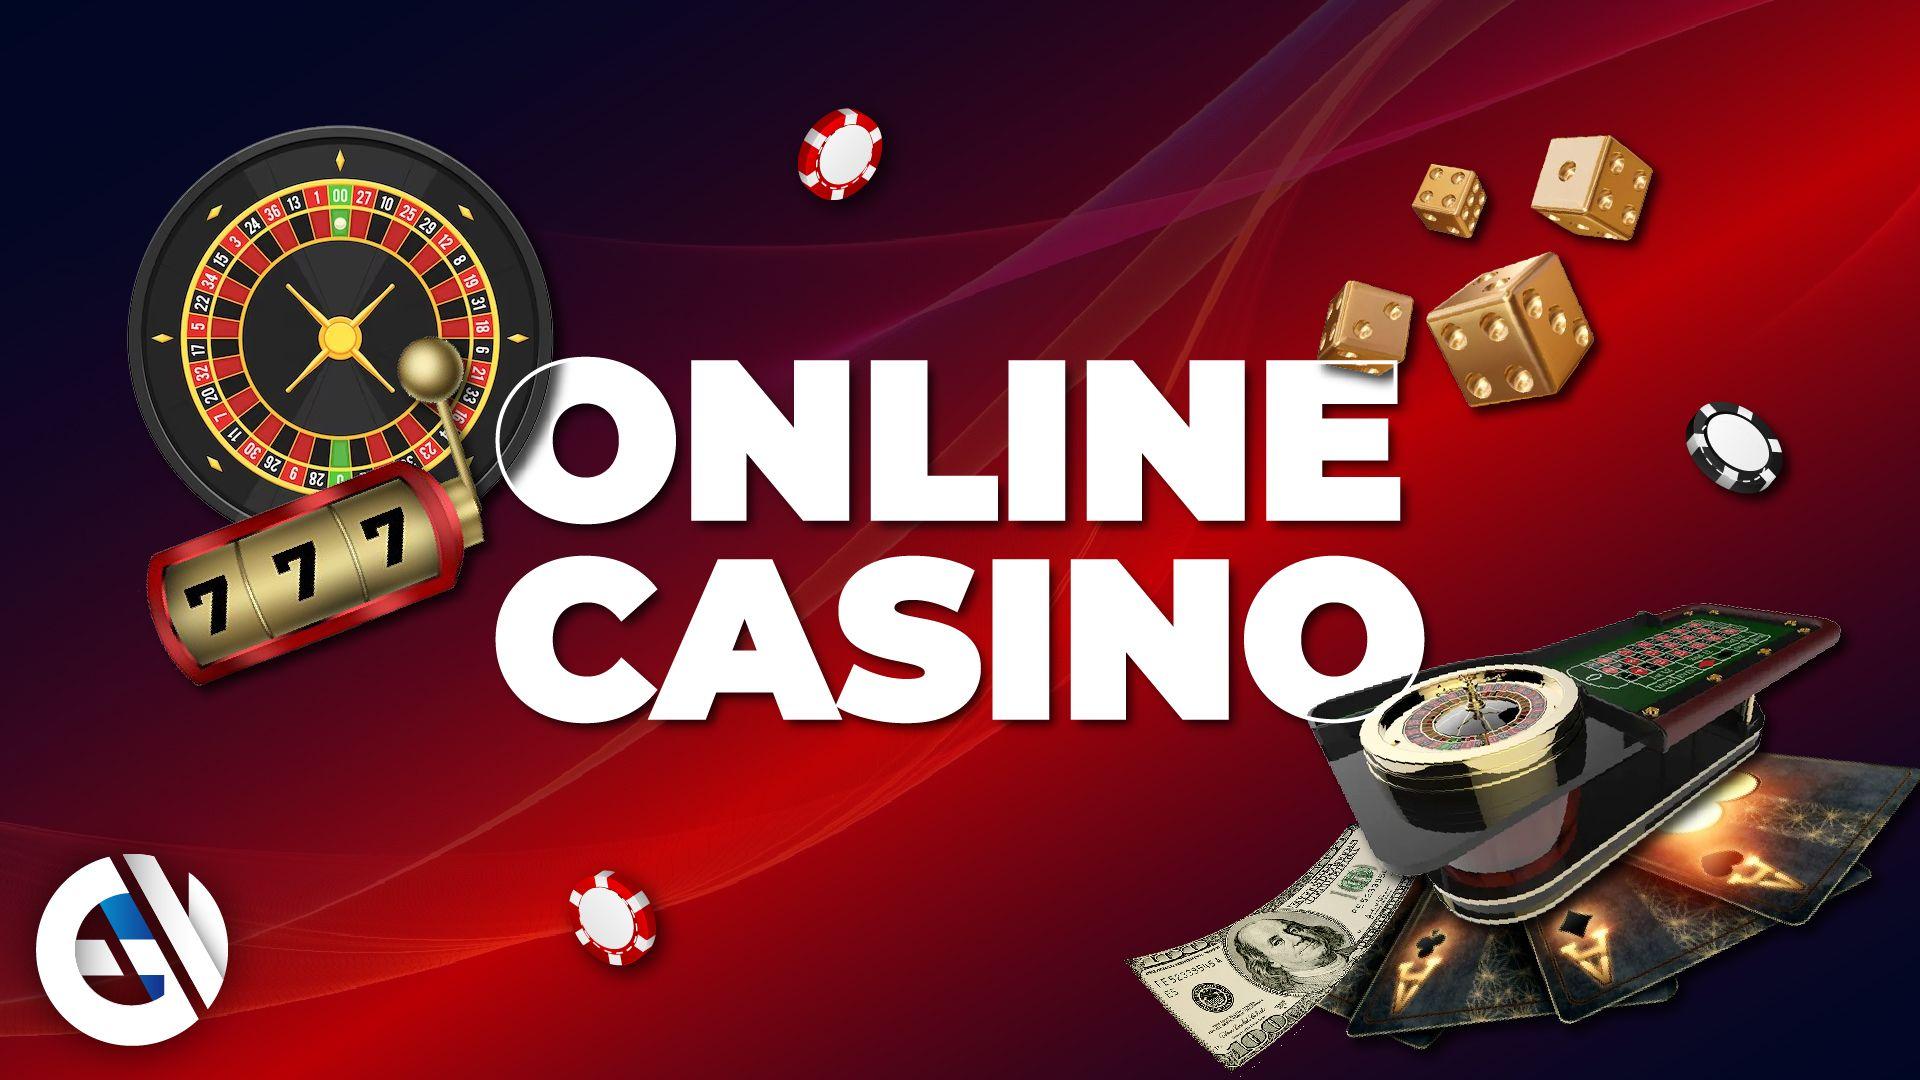 Casinos in Portugal: discover the best online bonuses and promotions